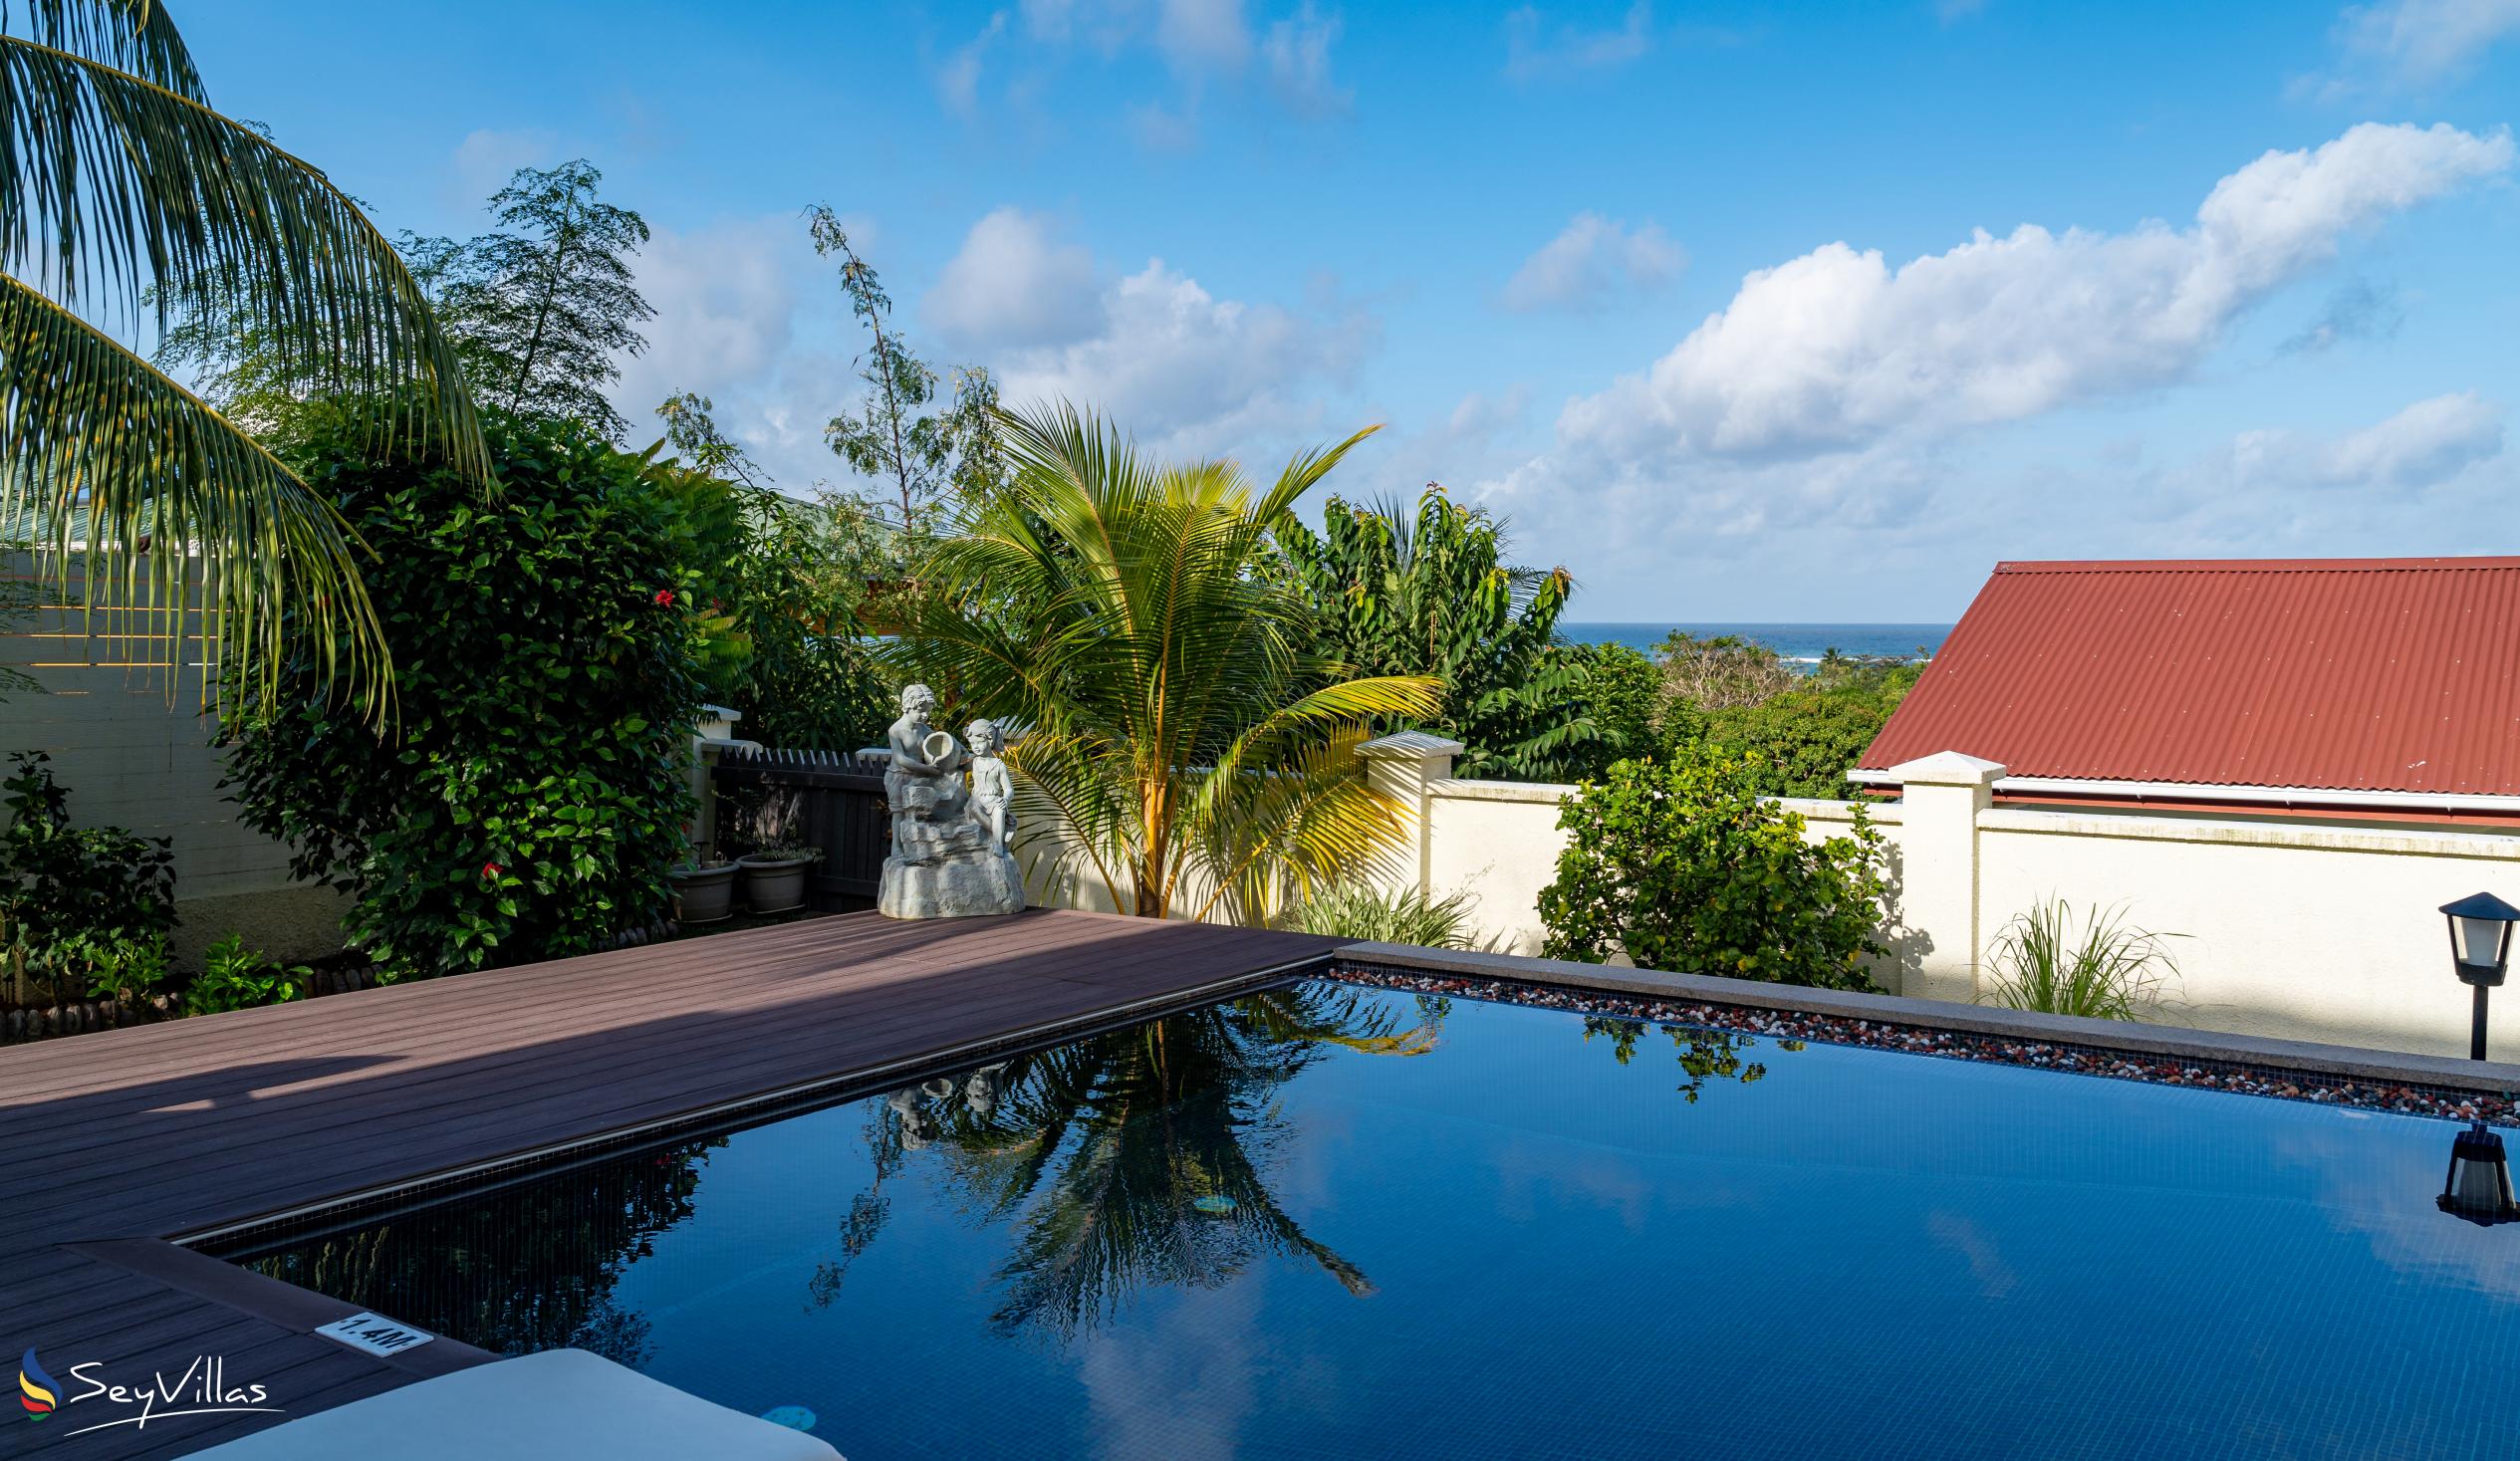 Foto 20: Emma's Guest House and Self-Catering - Esterno - Mahé (Seychelles)